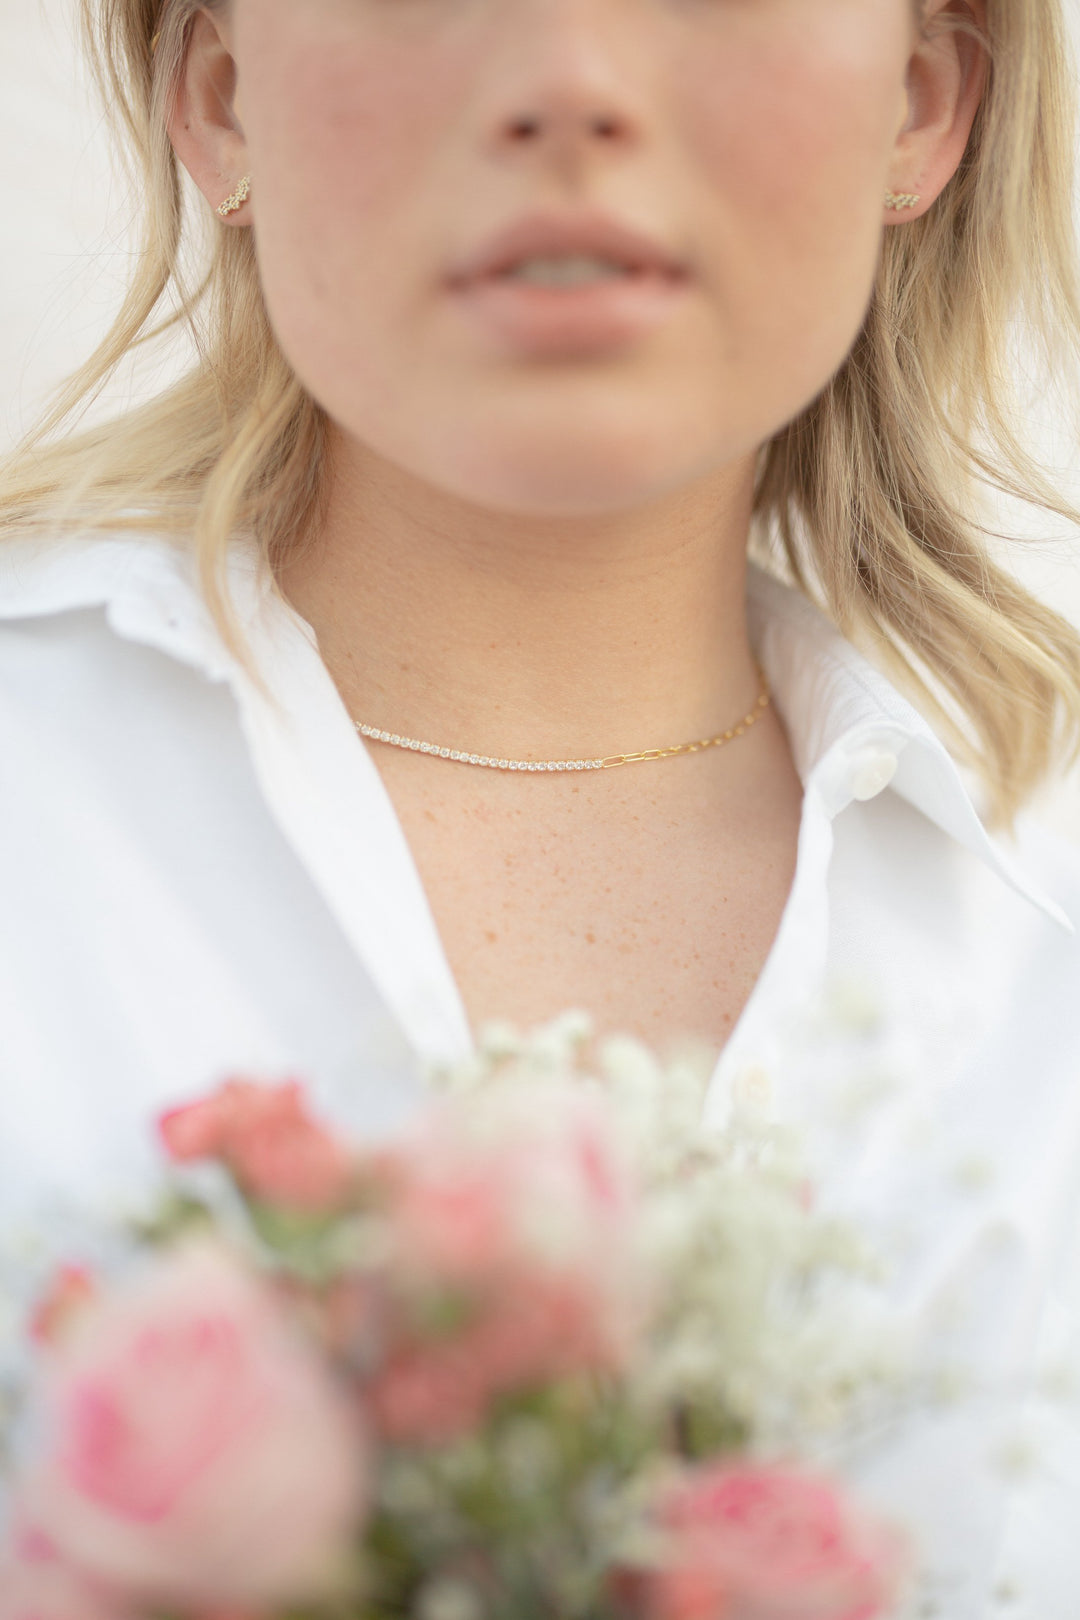 Best Wedding Guest Jewelry: Top 8 Looks for Spring/Summer